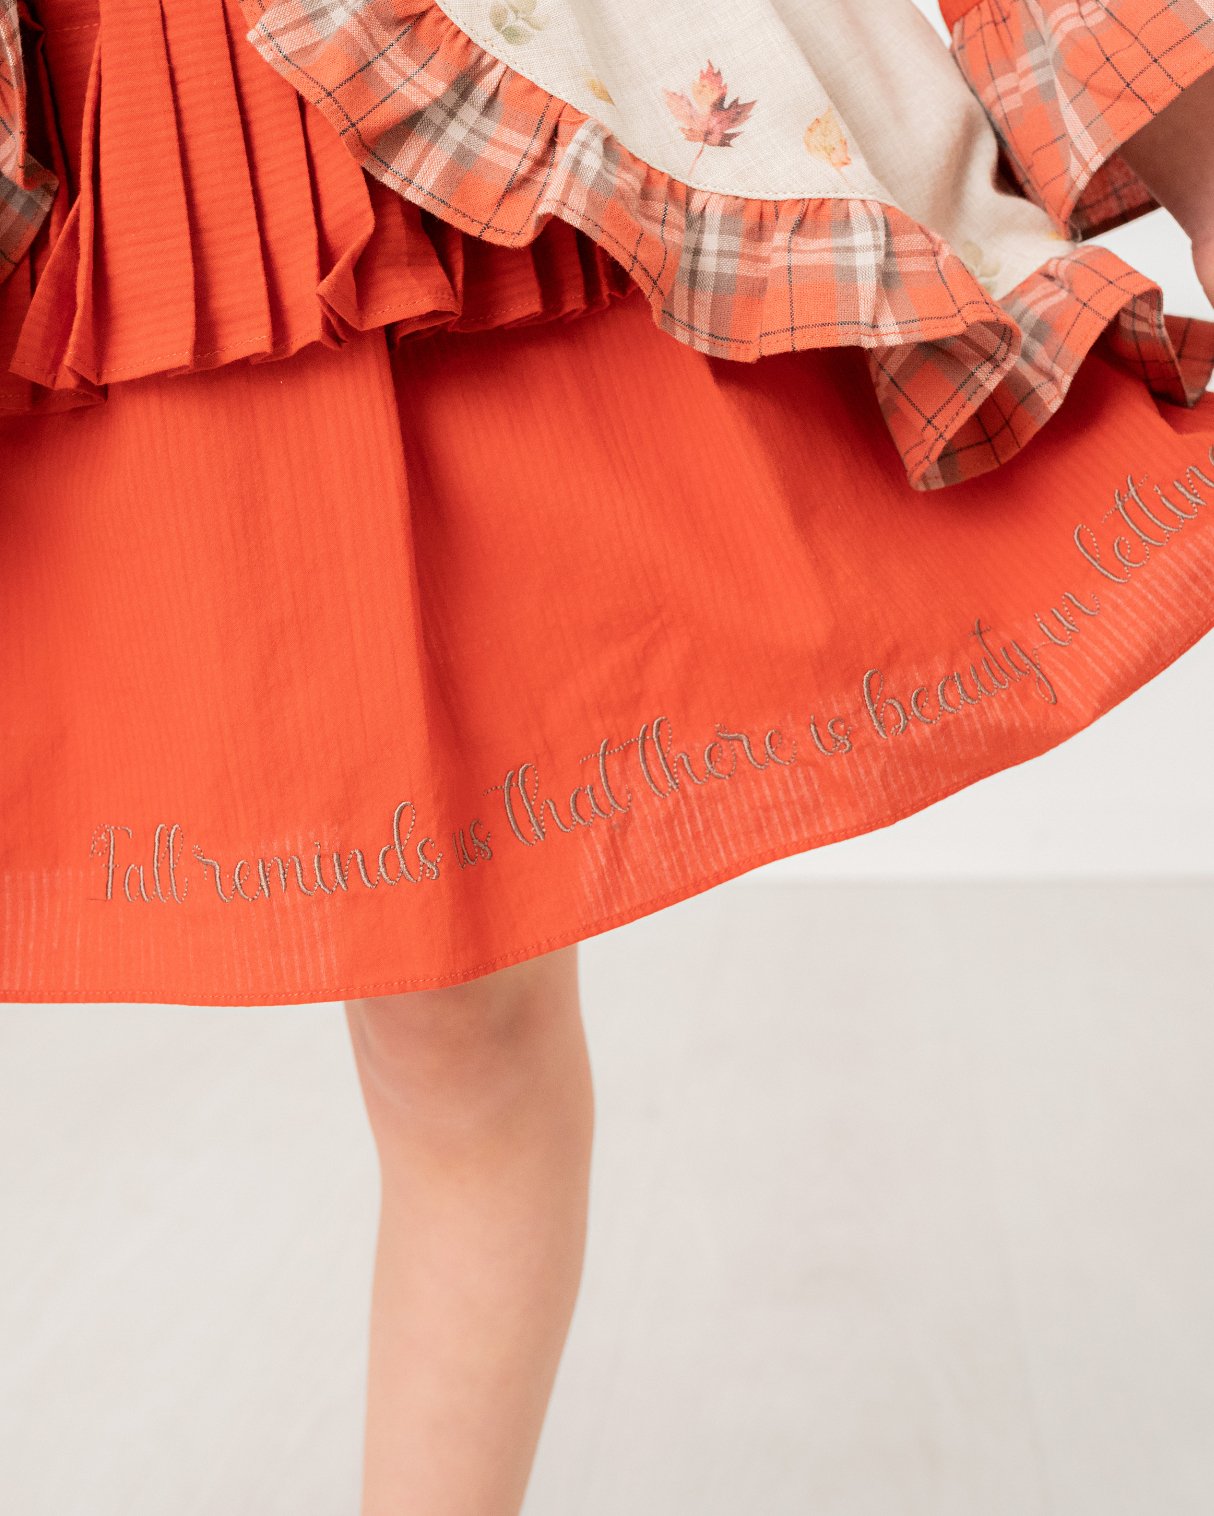 Beauty in Letting Go Watercolor Printed Burnt Orange and Khaki Pleat Accent Dress - Evie's Closet Clothing